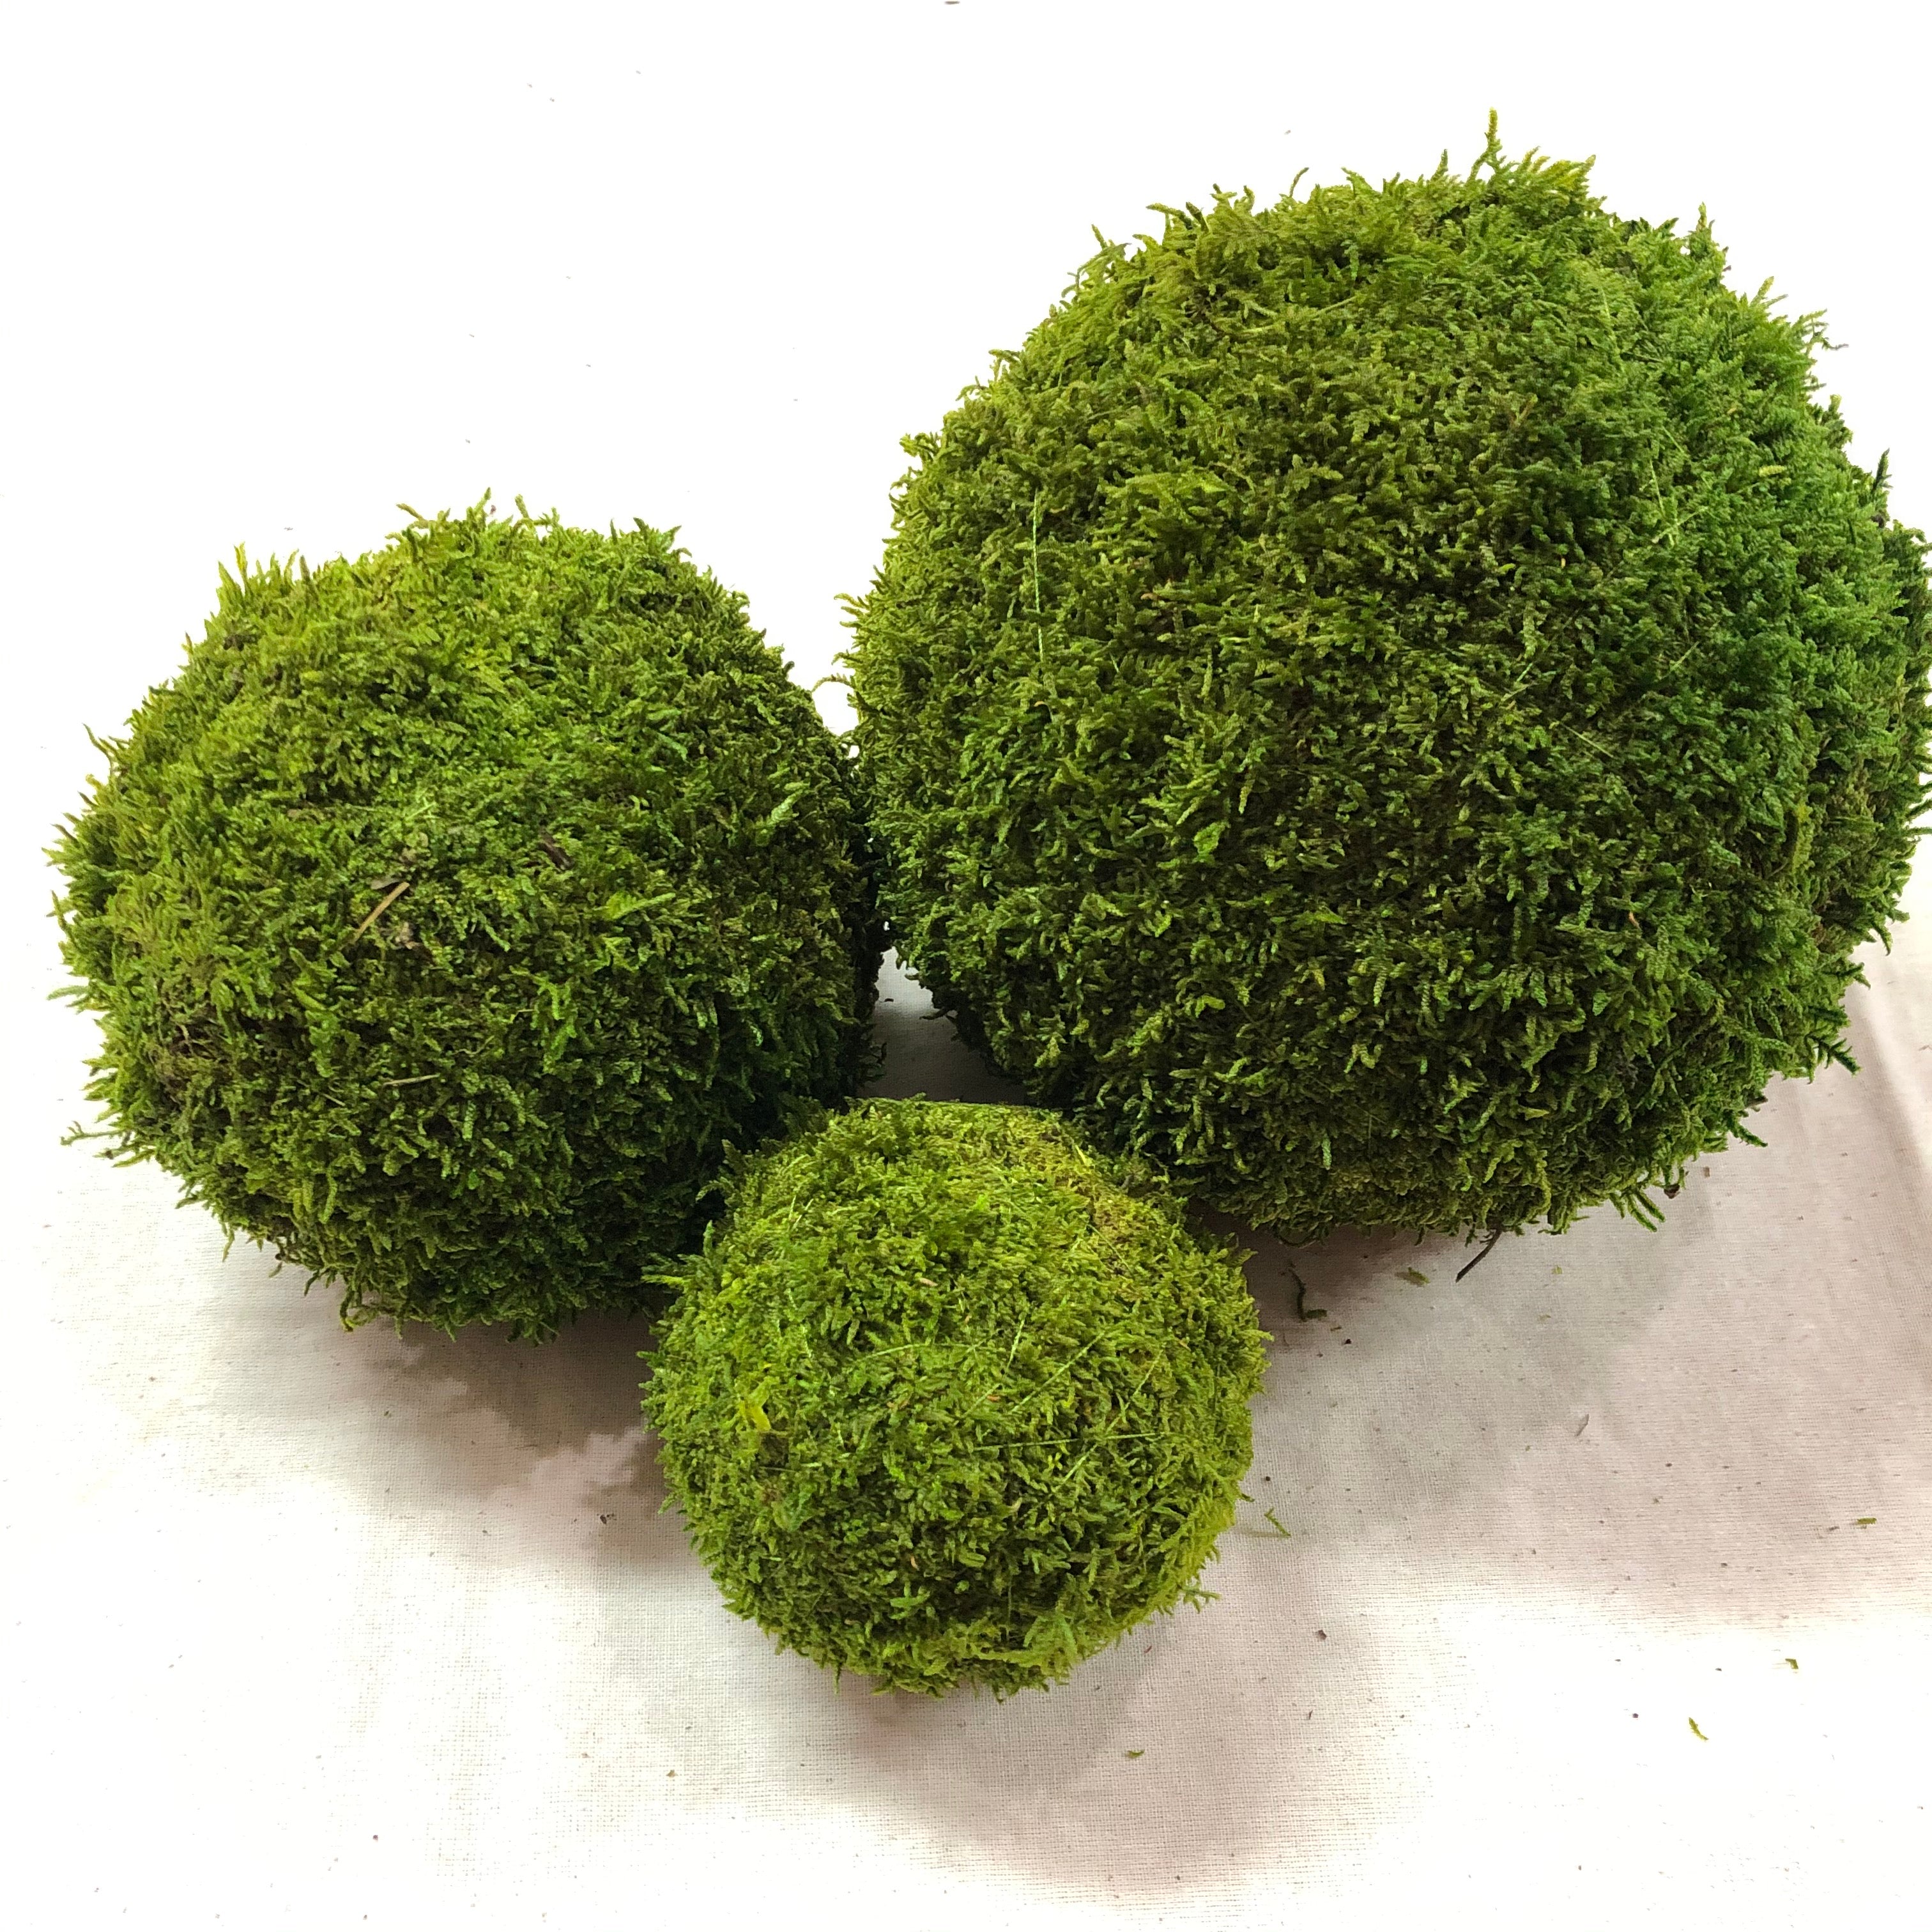 Moss Balls Small 4 Forever Green Art 4 inch Small Preserved Moss Ball made  in America [mos04] - $14.00 : Forever Green Art, Preserved Plants for Home  and Business